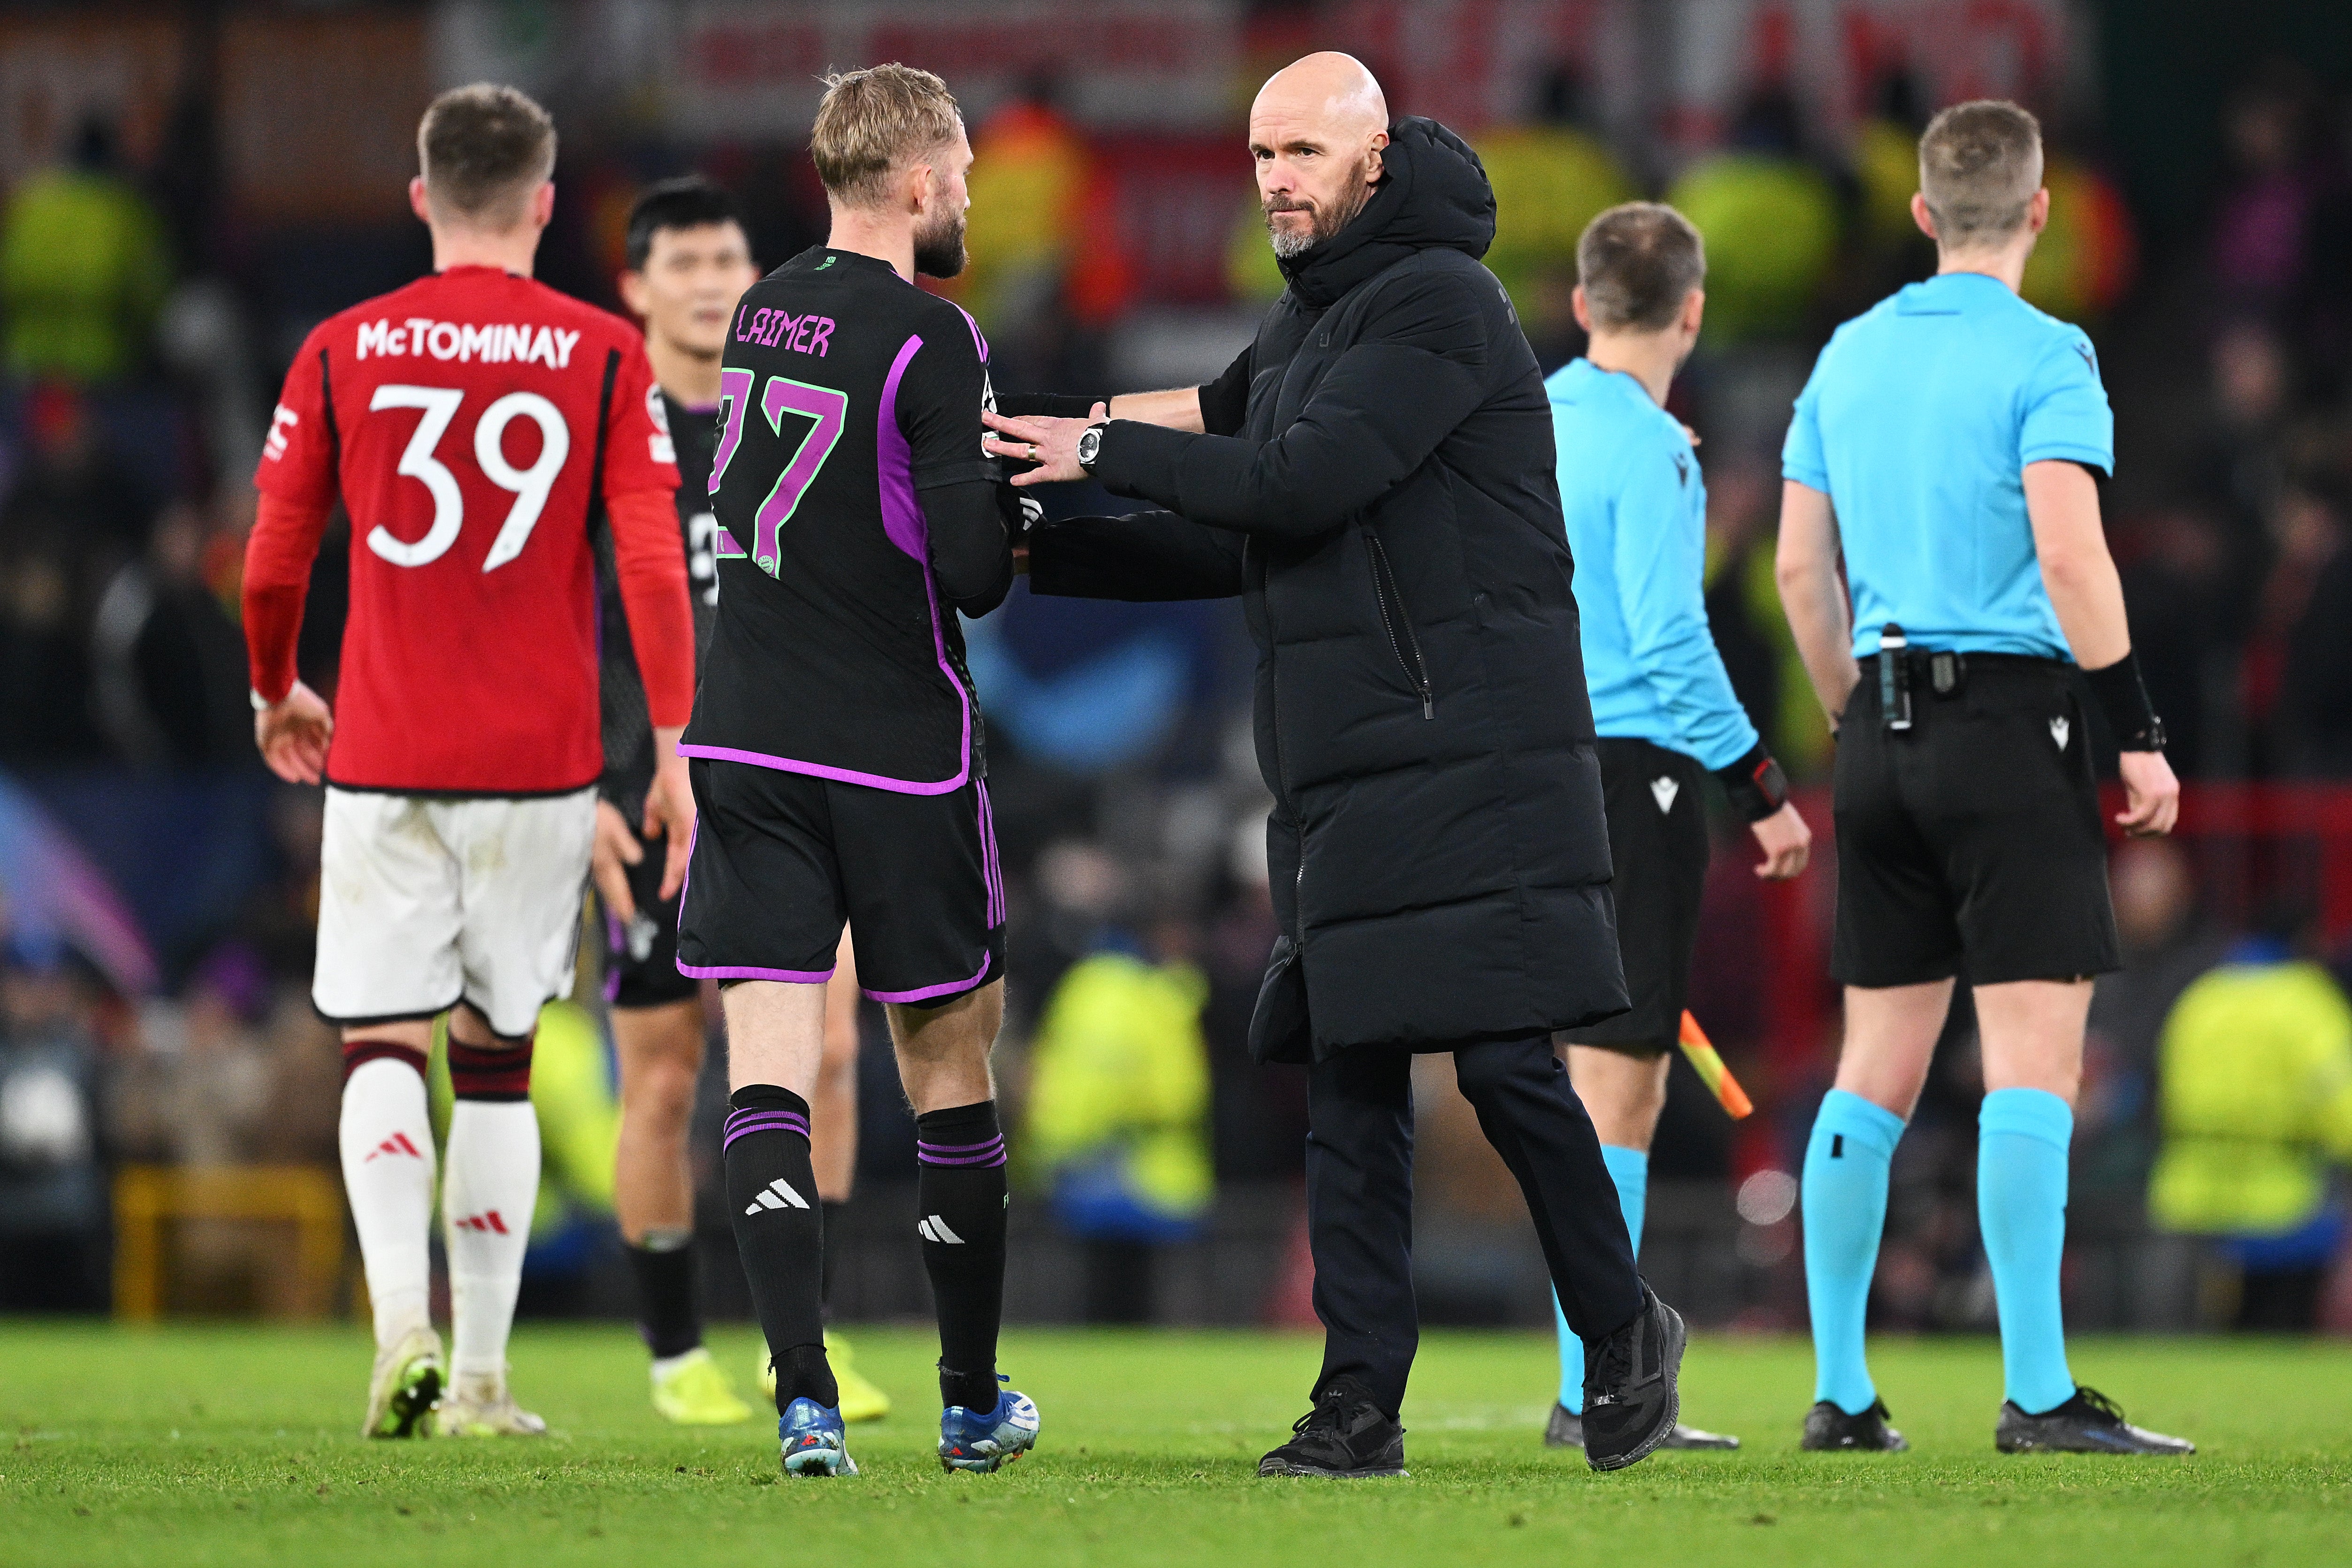 Ten Hag’s side now face Liverpool at Anfield on Sunday, where they lost 7-0 last season